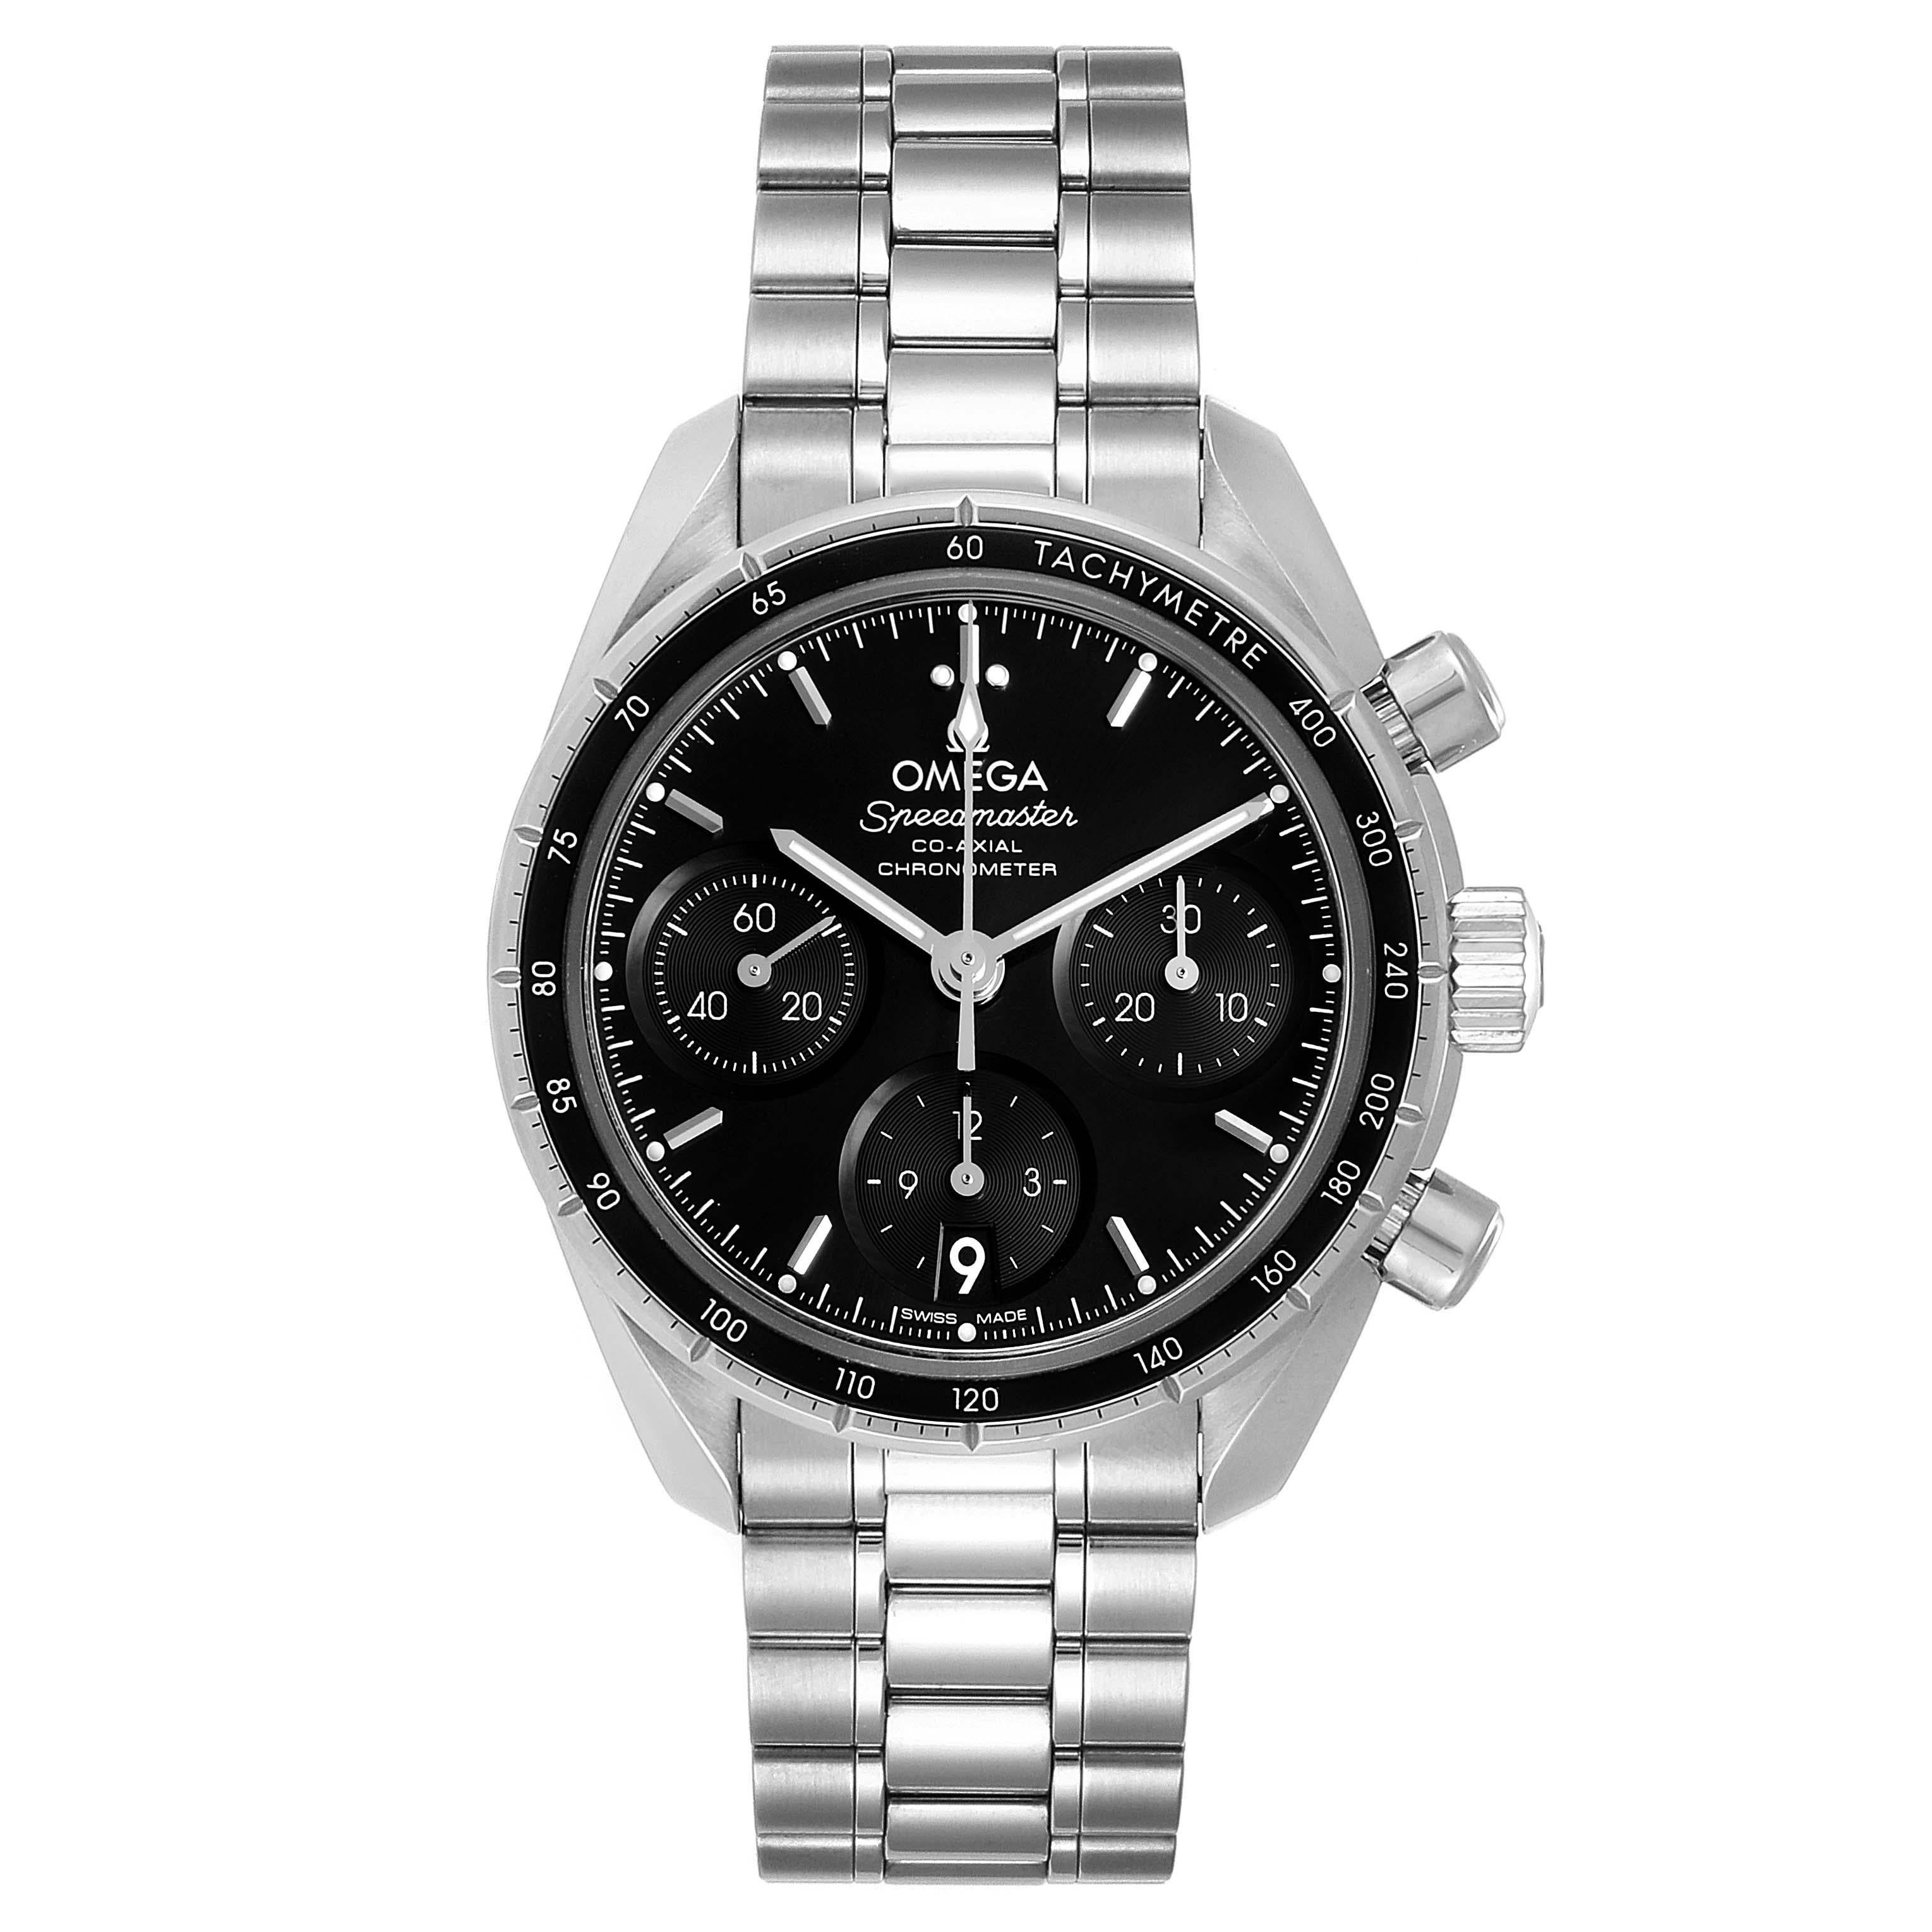 Omega Speedmaster 38 Co-Axial Chronograph Watch 324.30.38.50.01.001 Box Card. Authomatic self-winding C-Axial chronograph movement. Calibre 3330. Stainless steel round case 38.0 mm in diameter. Seahorse medallion on the caseback. Stainless steel